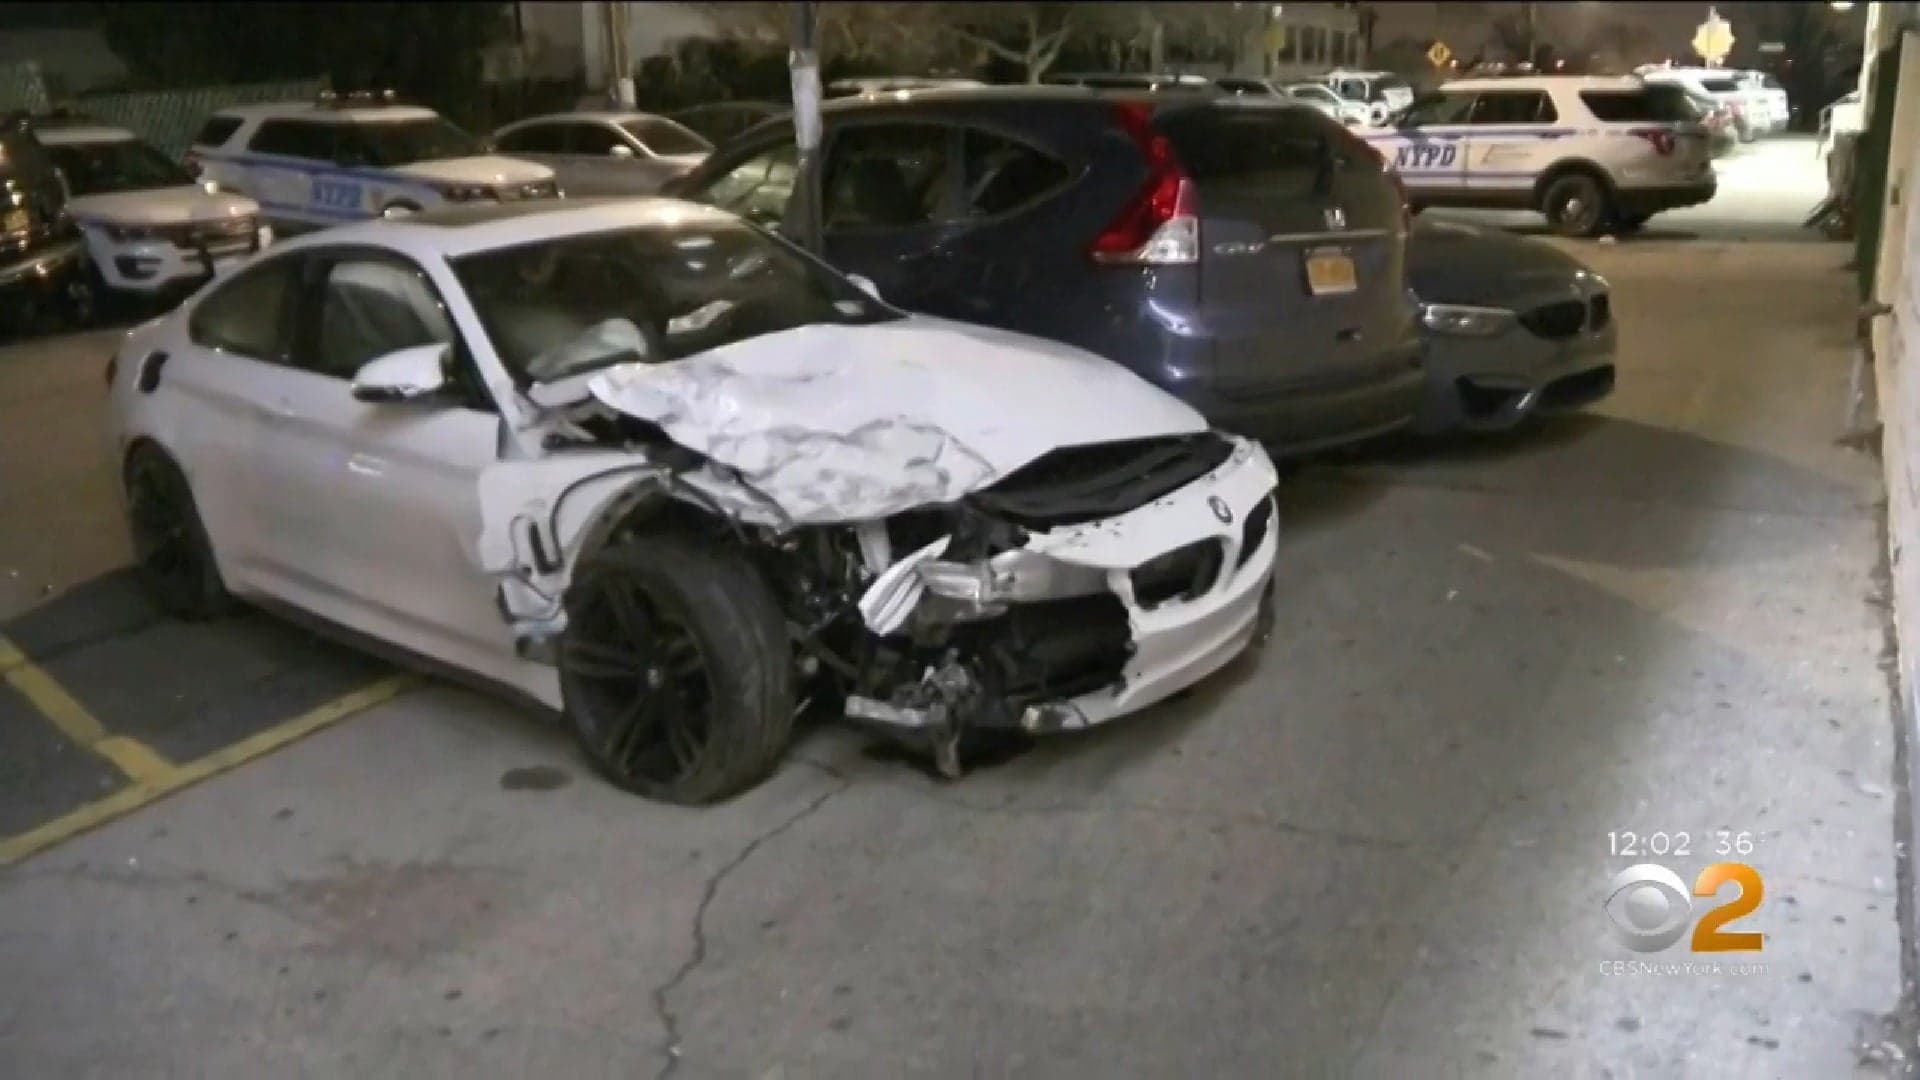 2 Intoxicated BMW Drivers Arrested After Street Racing-Related Crash in the Bronx